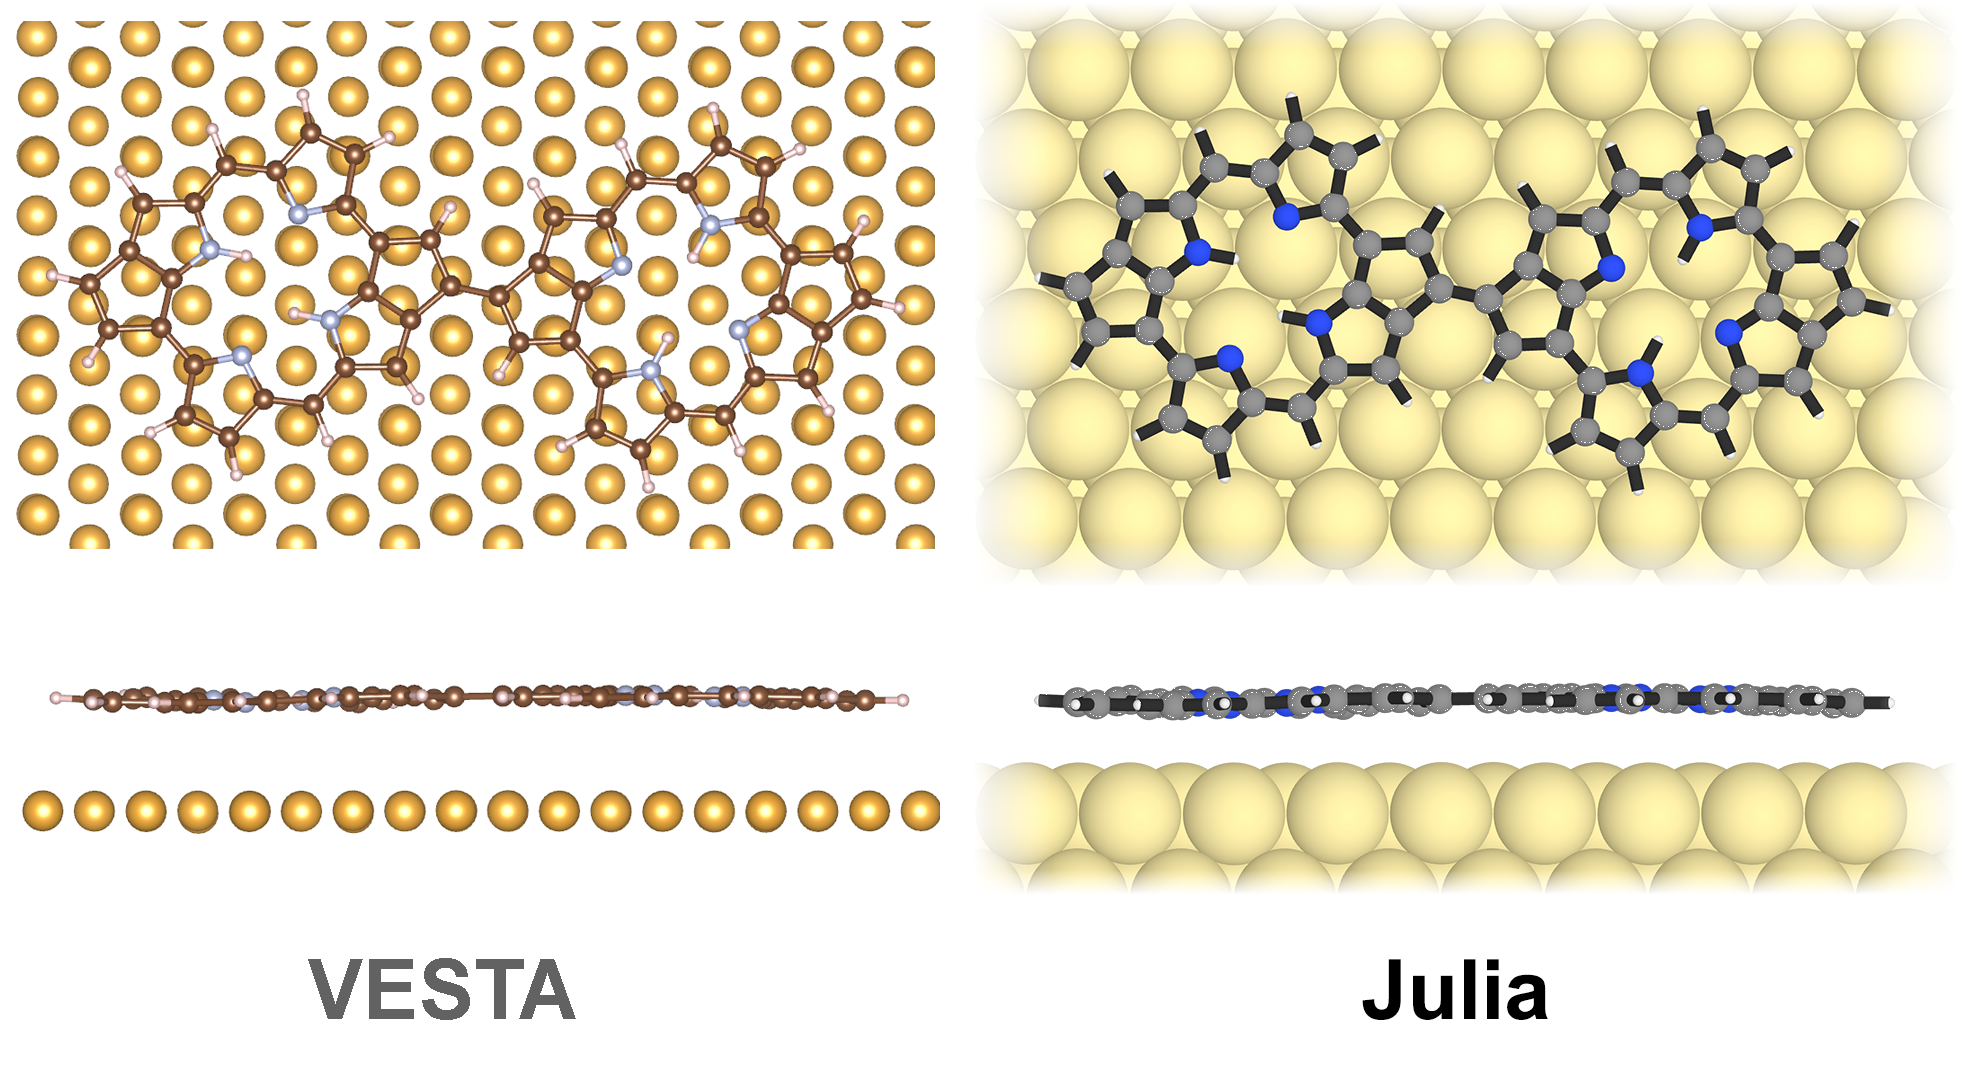 Comparison of molecule at surface illustrations